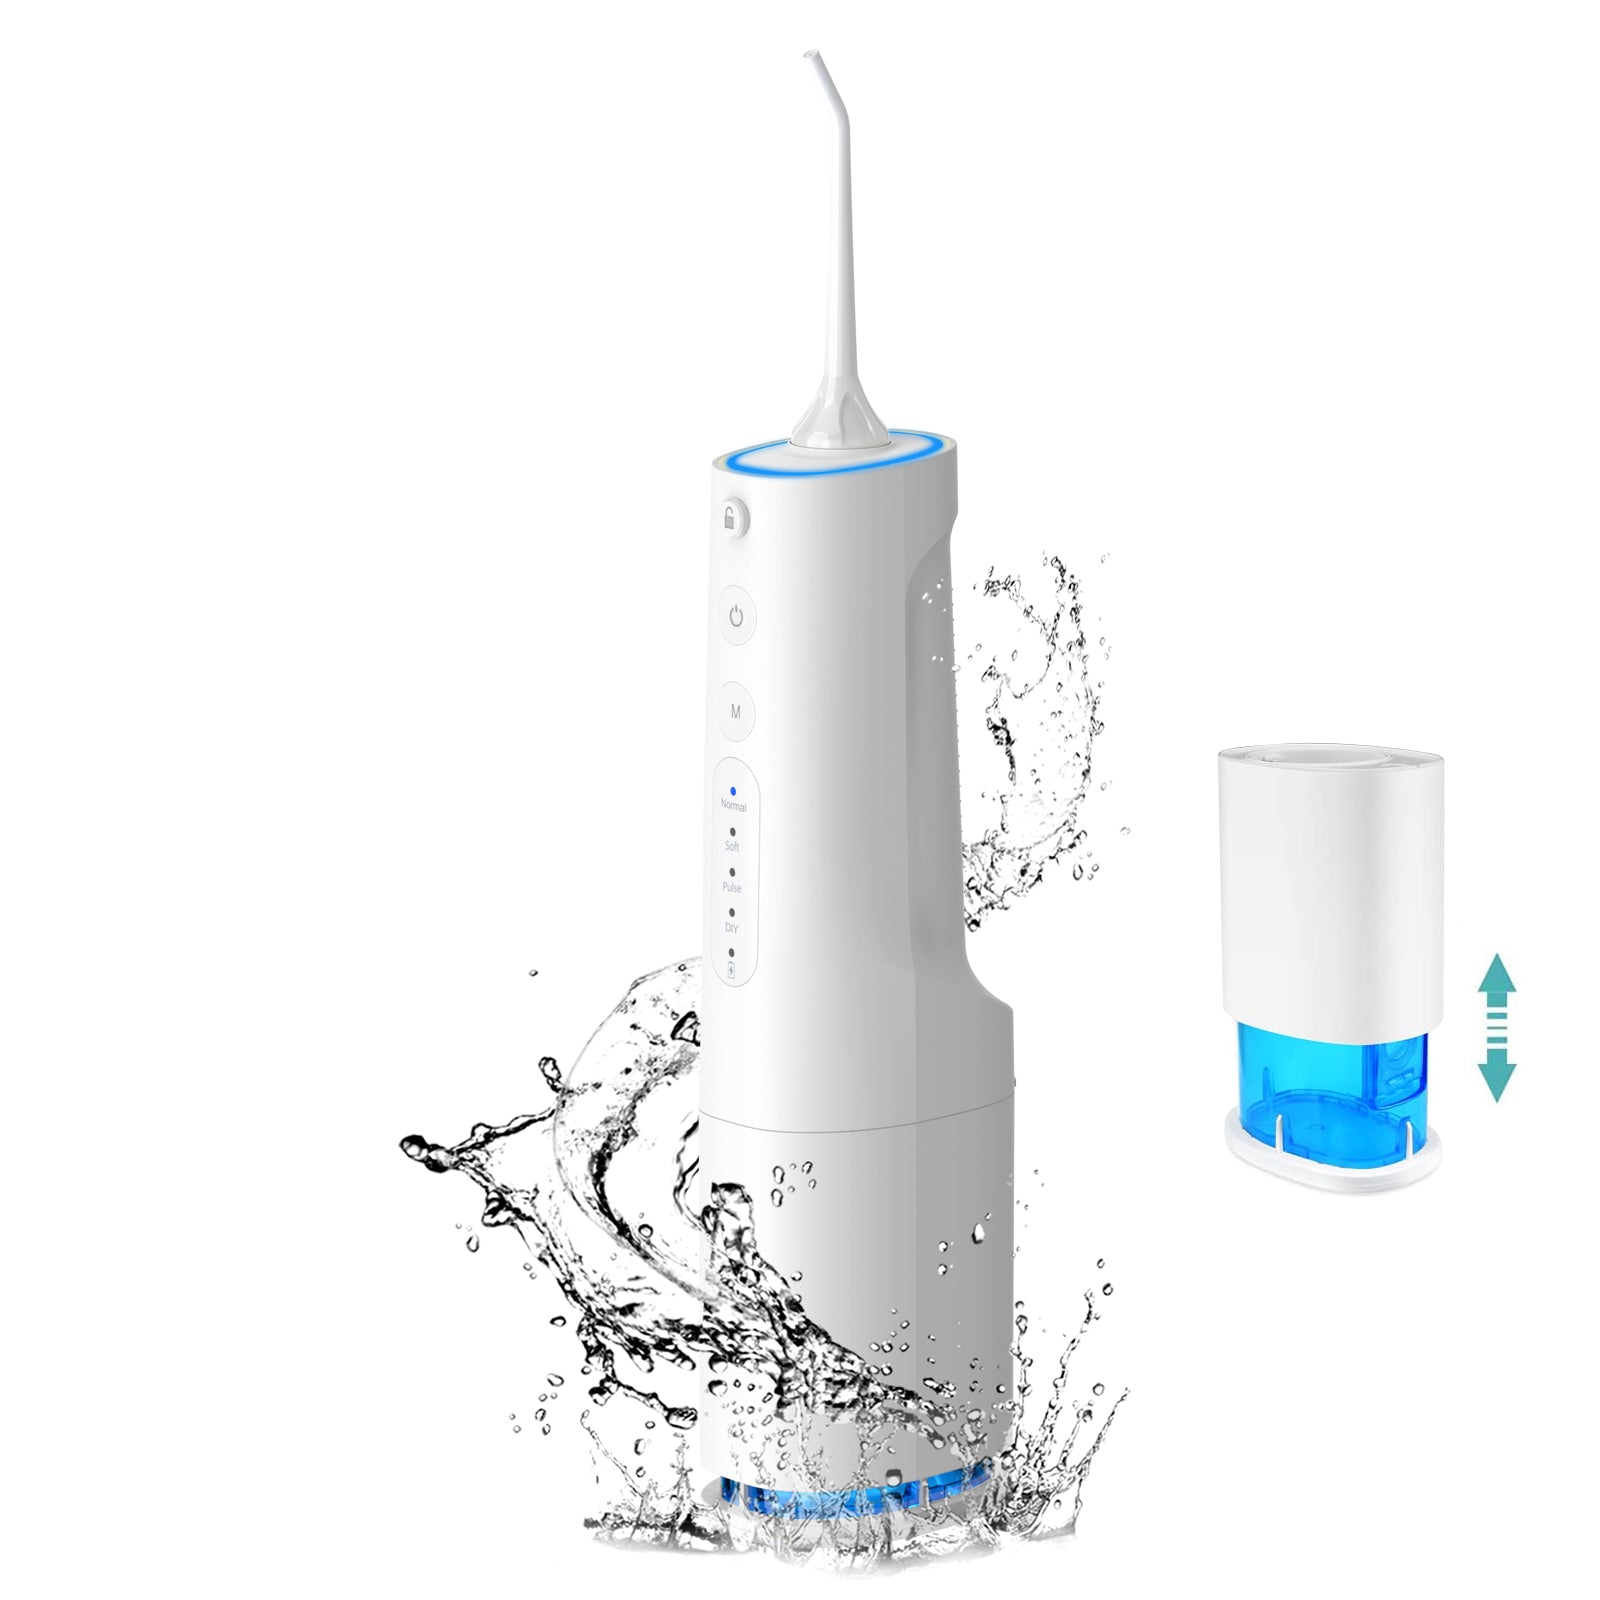 Water Flosser Cordless for Teeth, Ifanze 4 Modes Dental Oral Irrigator, Portable and Rechargeable IPX7 Waterproof Water Teeth Cleaner Picks for Home Travel